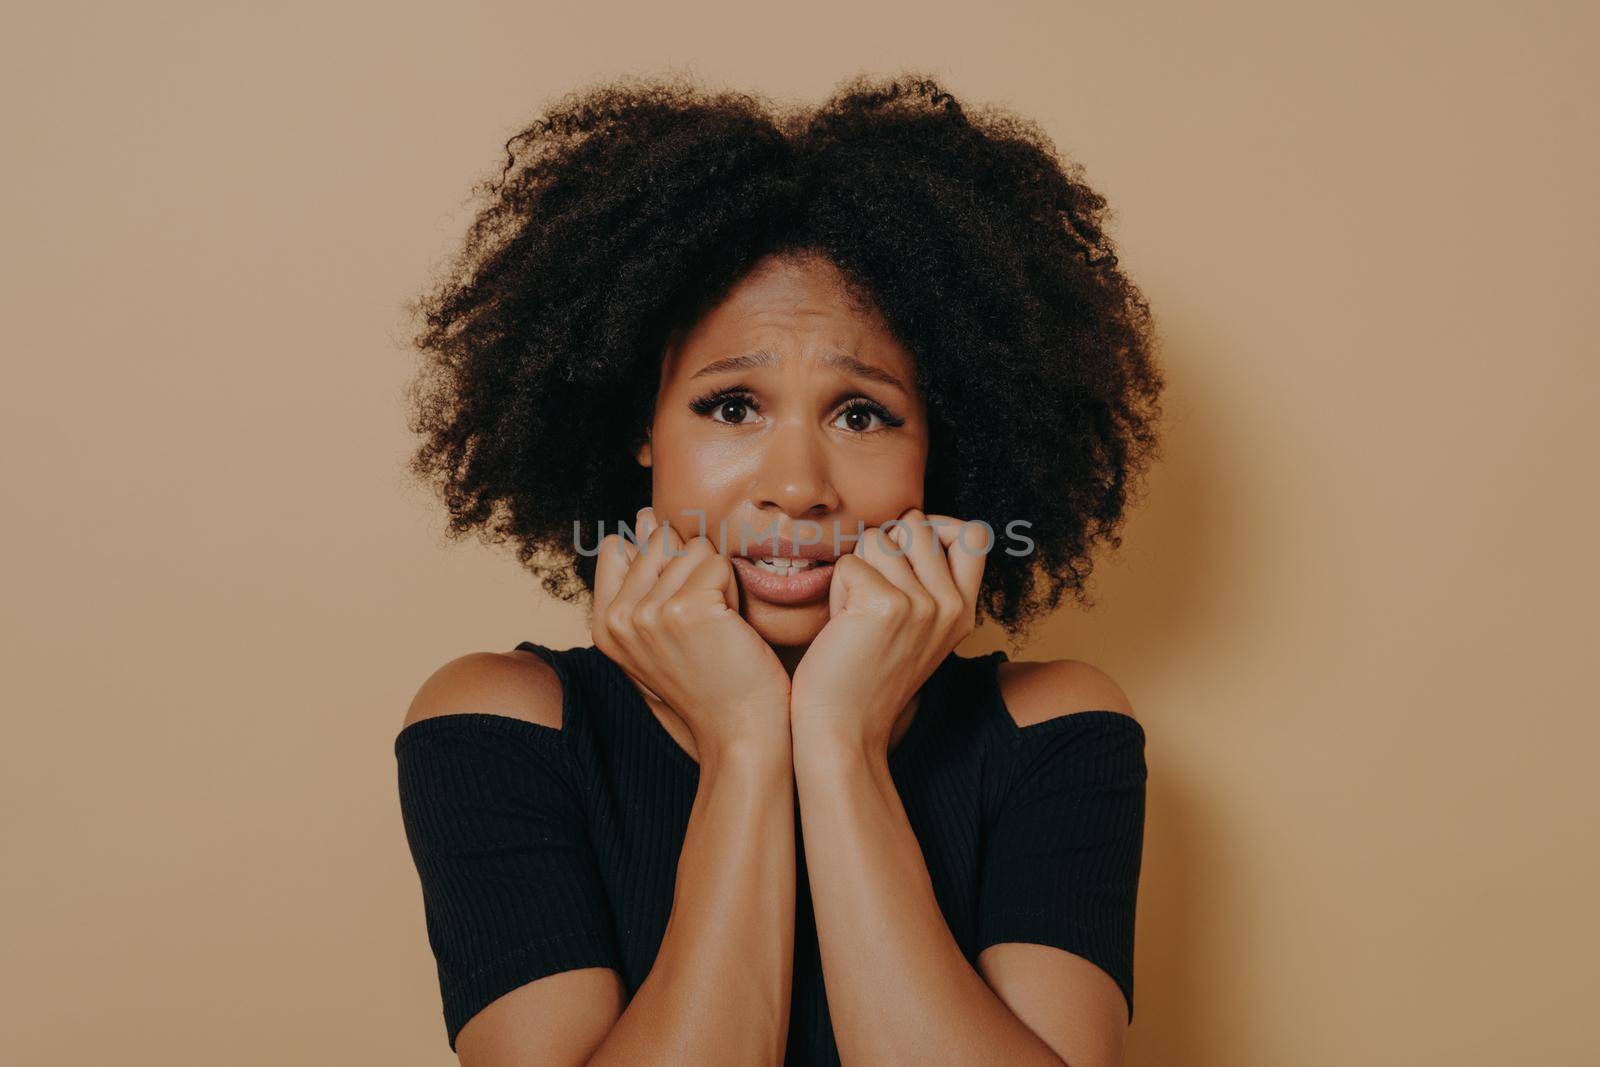 Scared mixed race female with curly hairstyle looking nervously and feeling stress, african woman being afraid of something while posing against beige background. Fear and anxiety concept